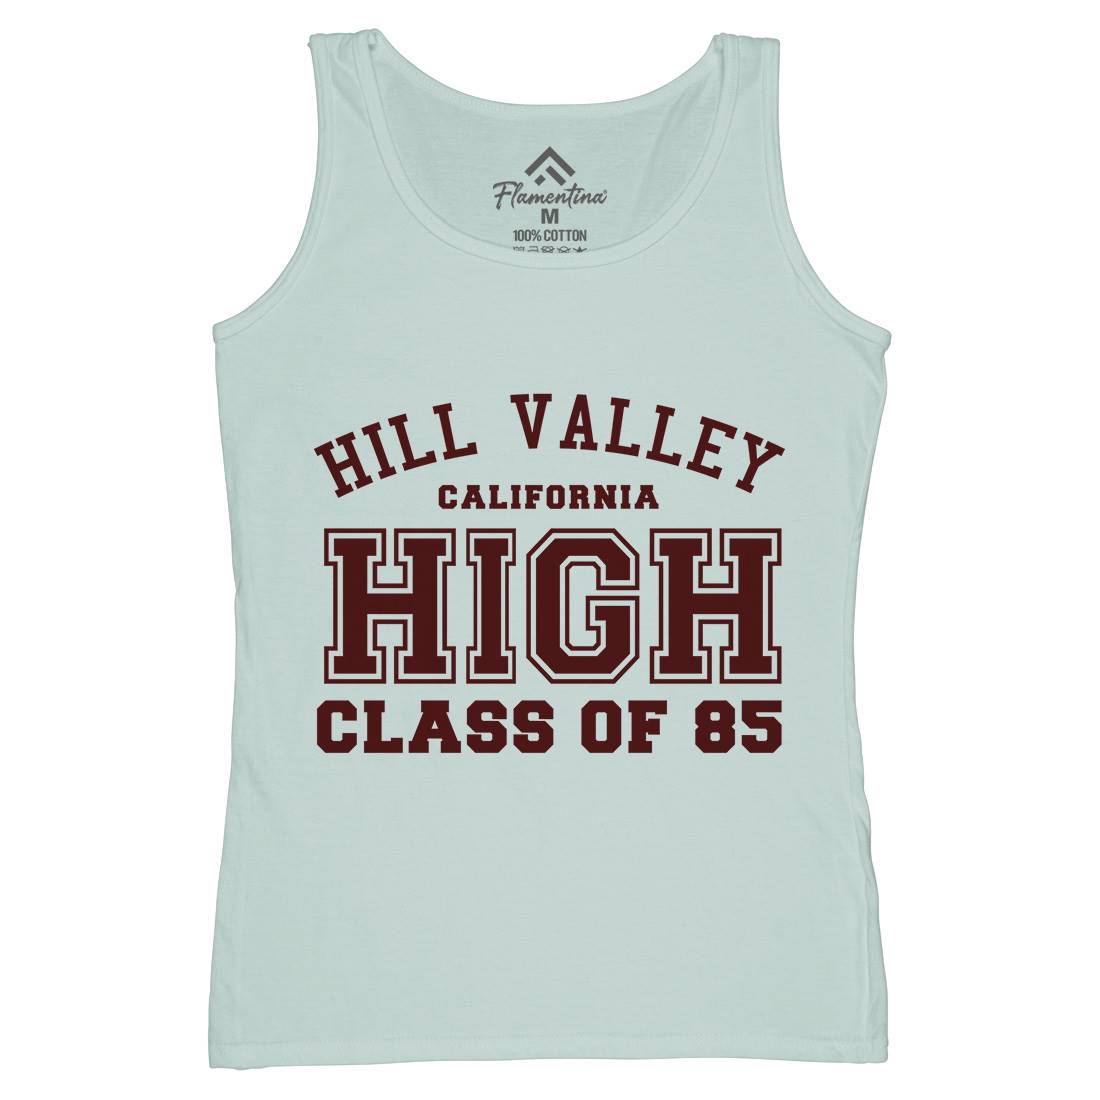 Hill Valley Womens Organic Tank Top Vest Space D113